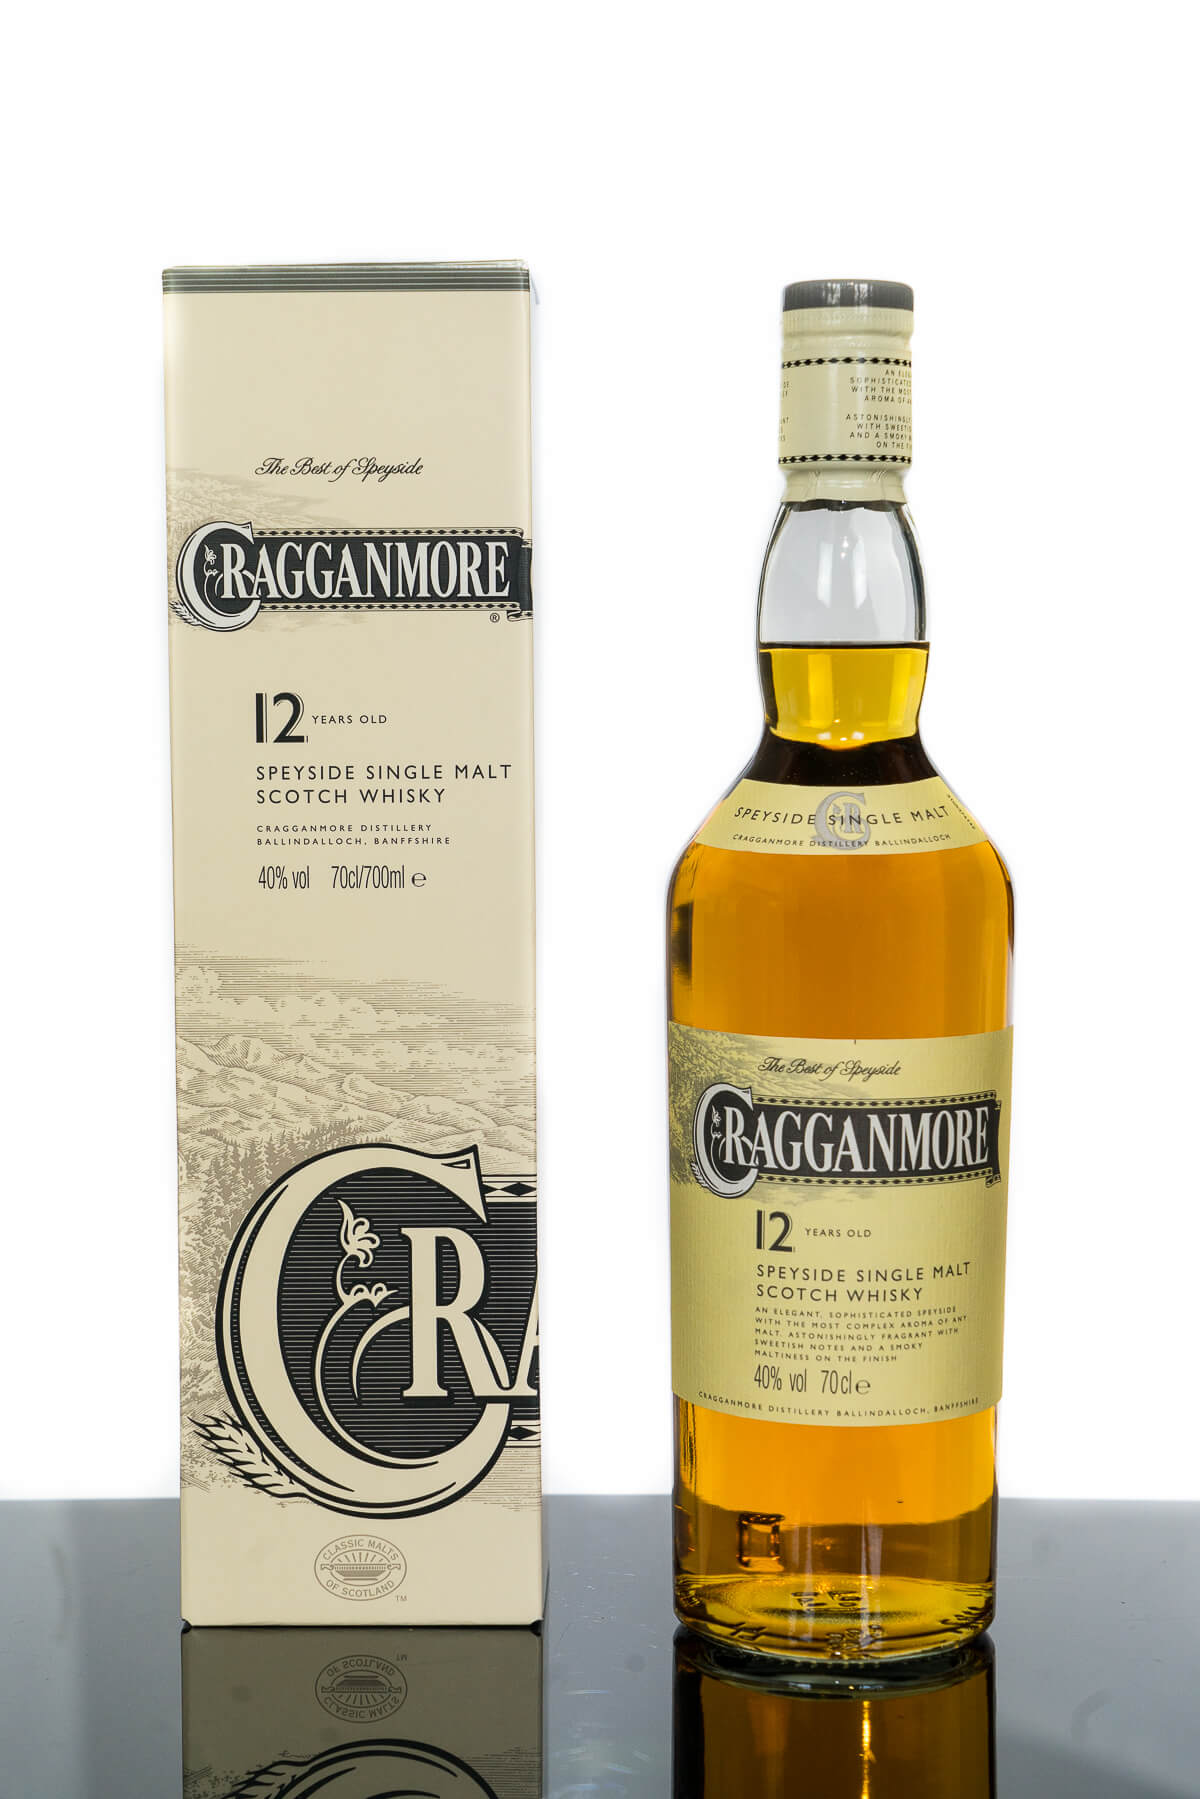 Cragganmore 12 Years Old Speyside Single Malt Scotch Whisky 700ml